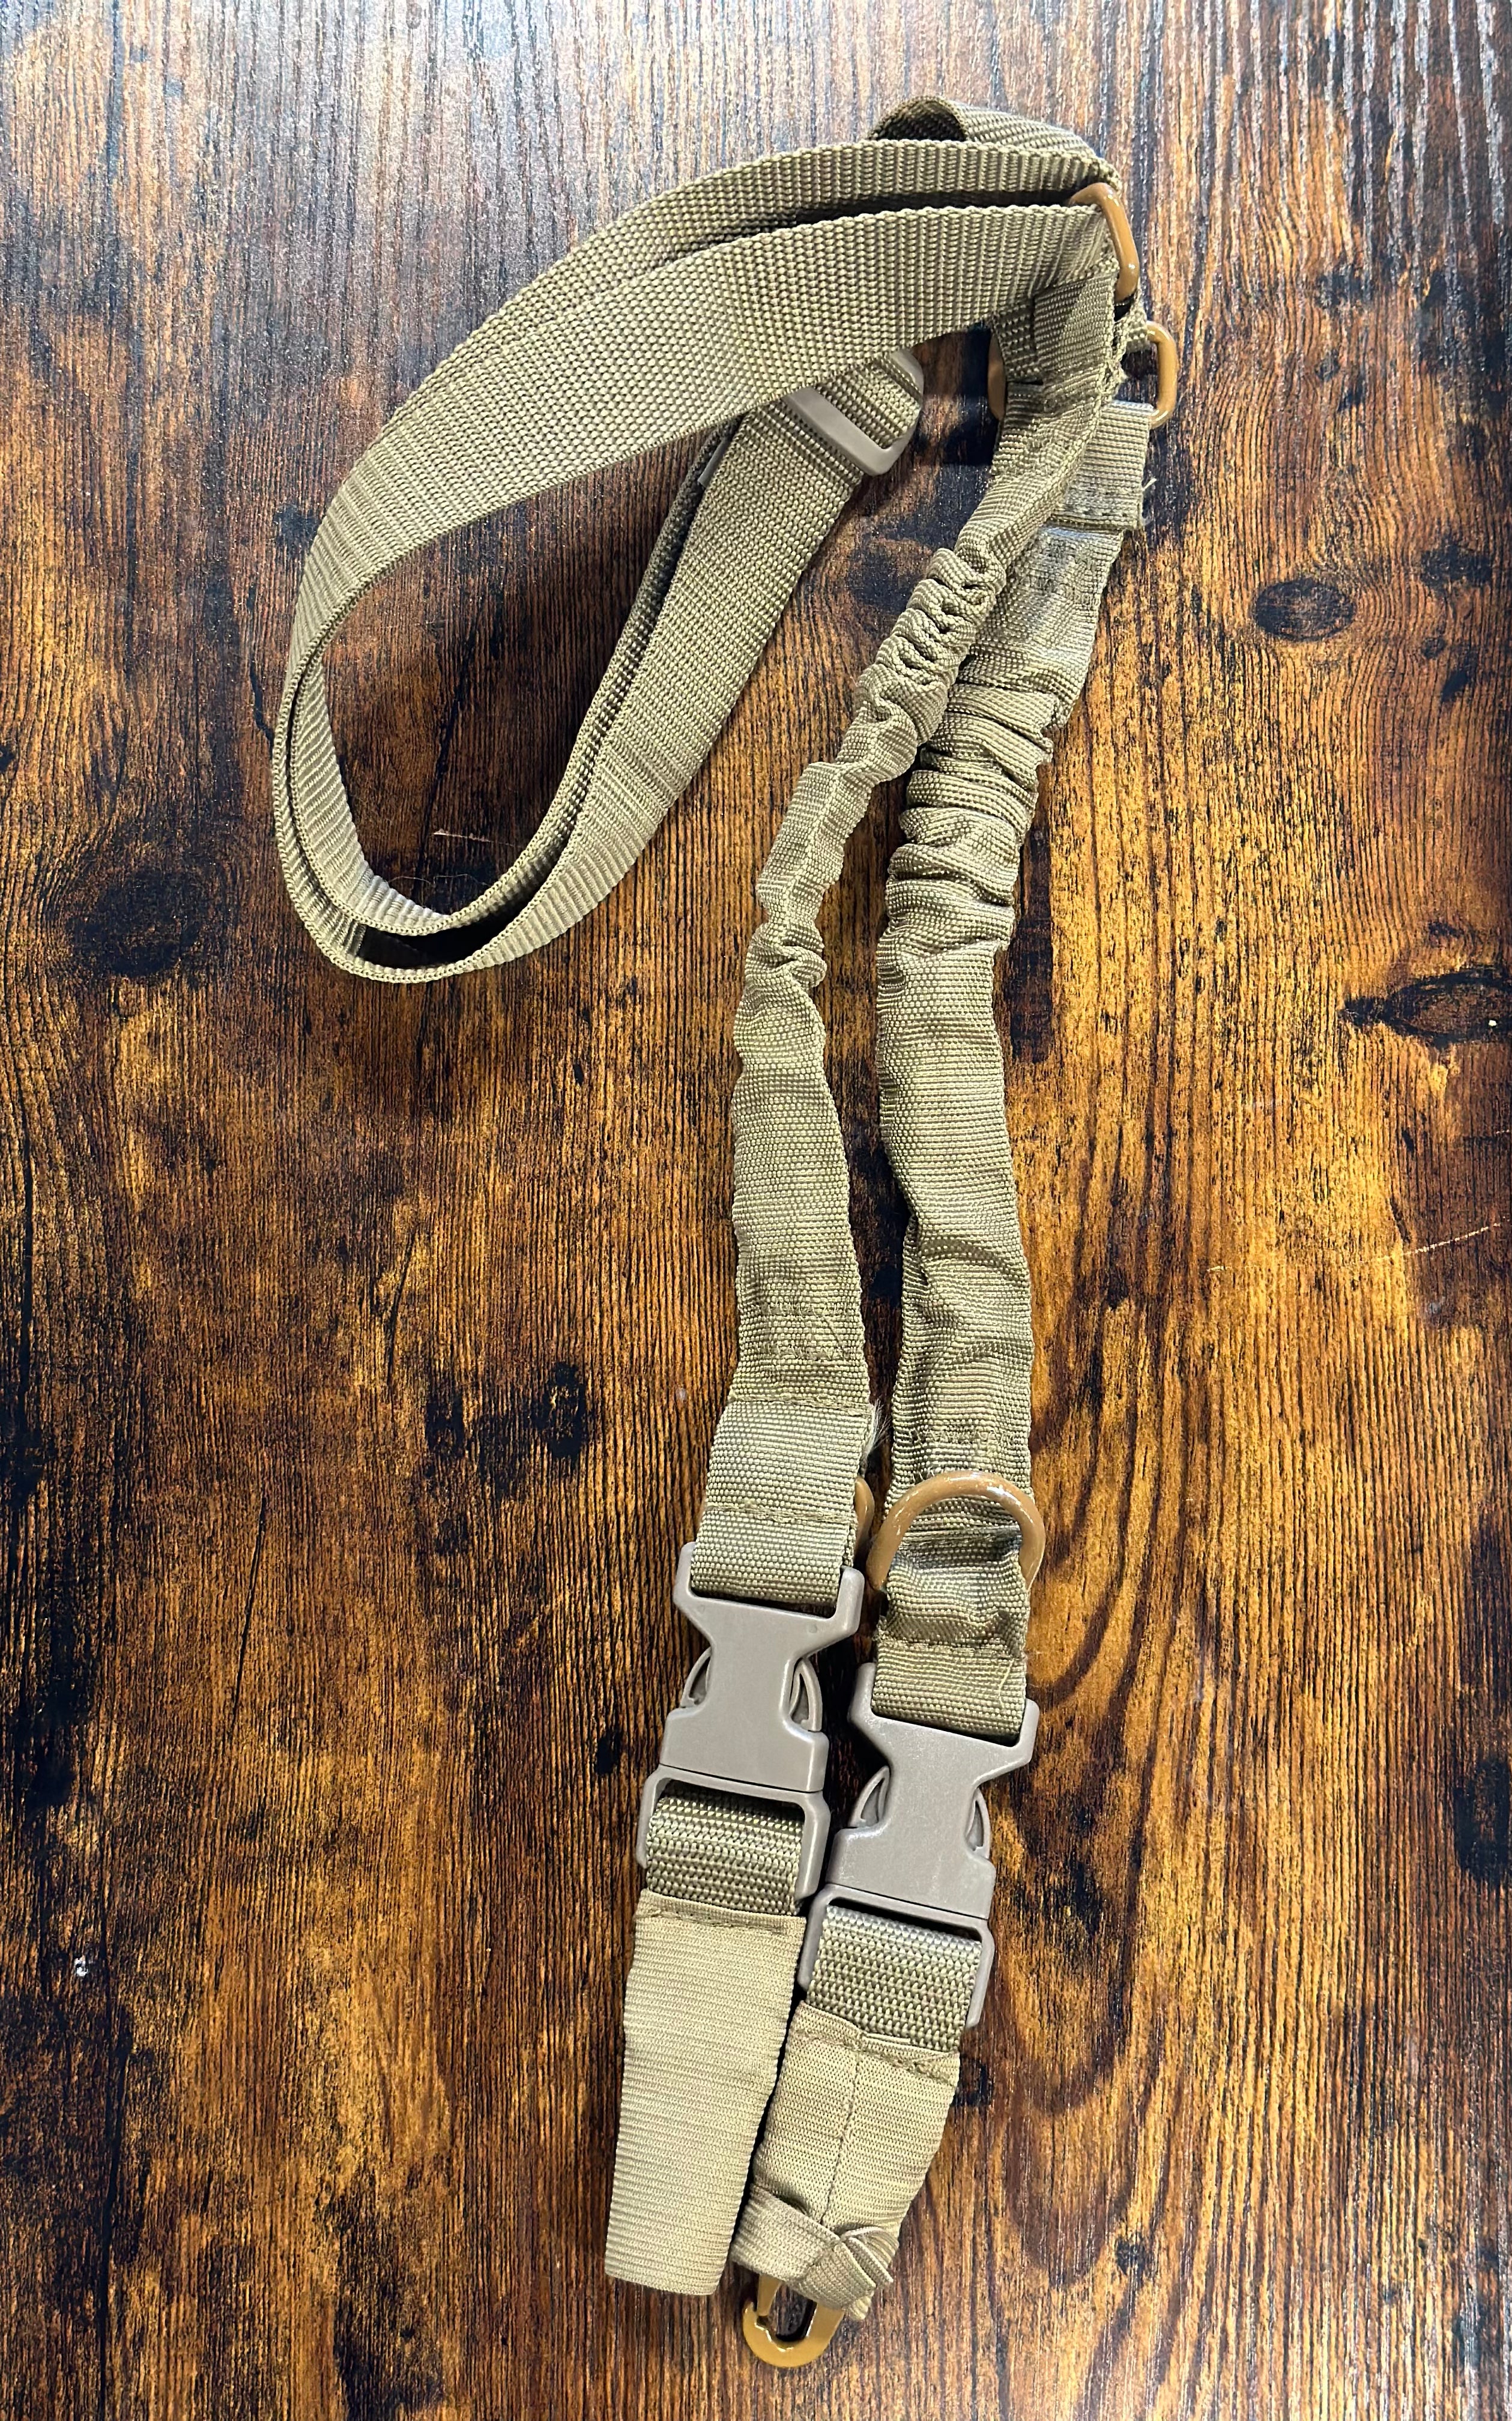 Tactical 2 Point Gun Sling Shoulder Strap with QD Metal Buckle